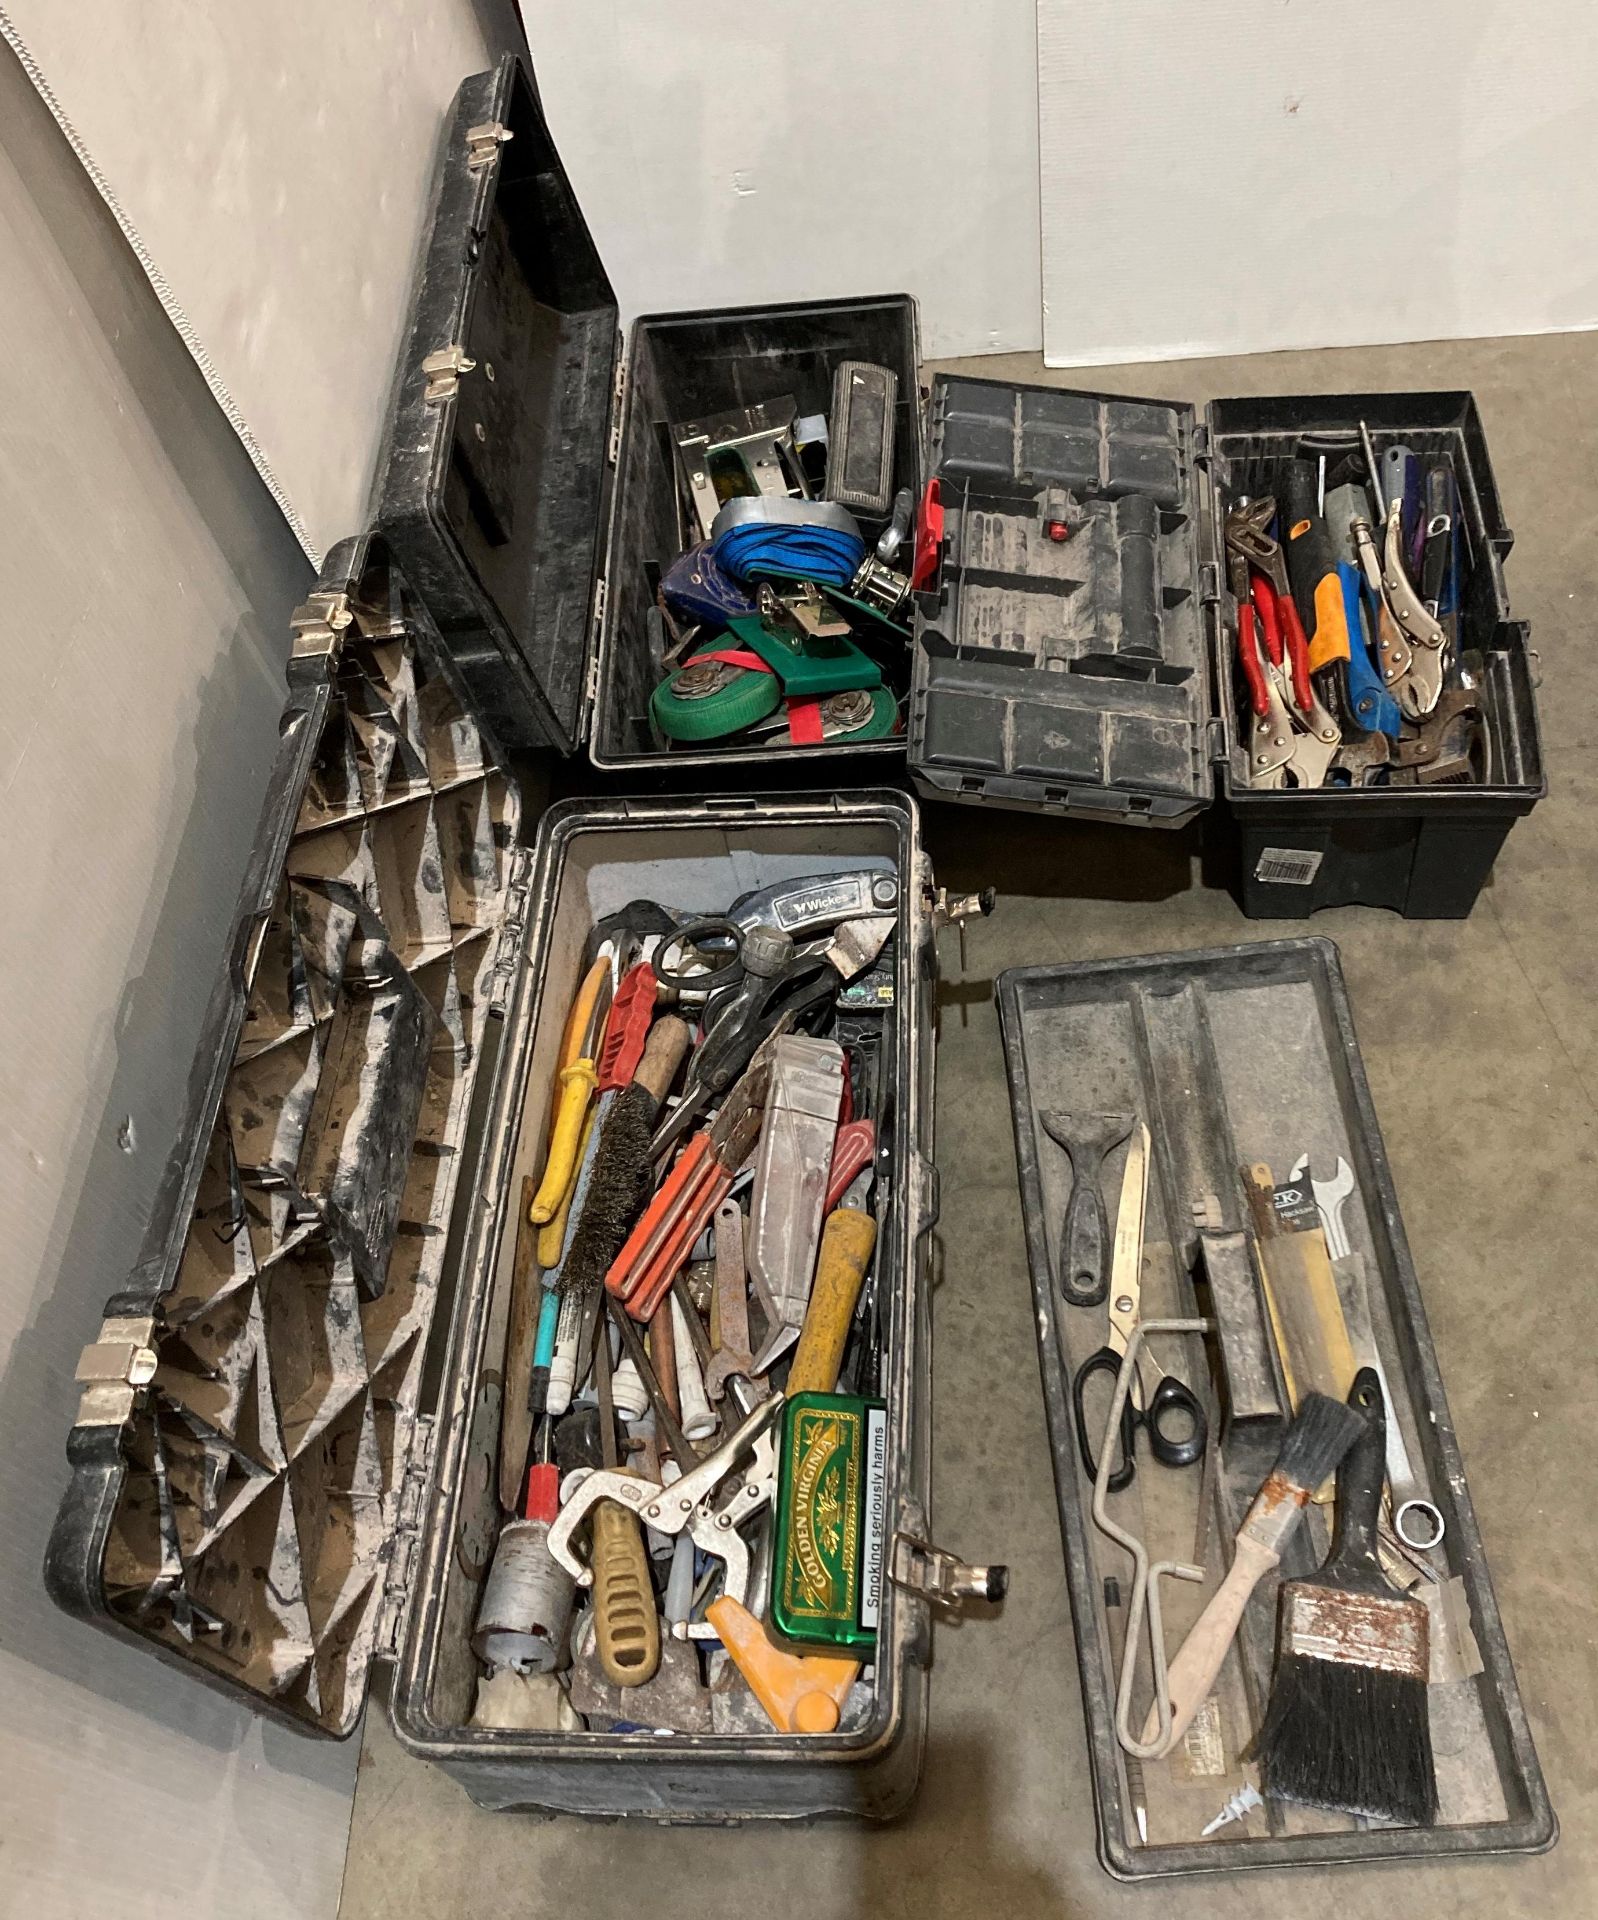 3 x assorted tool boxes and contents - assorted hand tools, spanners, screwdrivers, pliers,